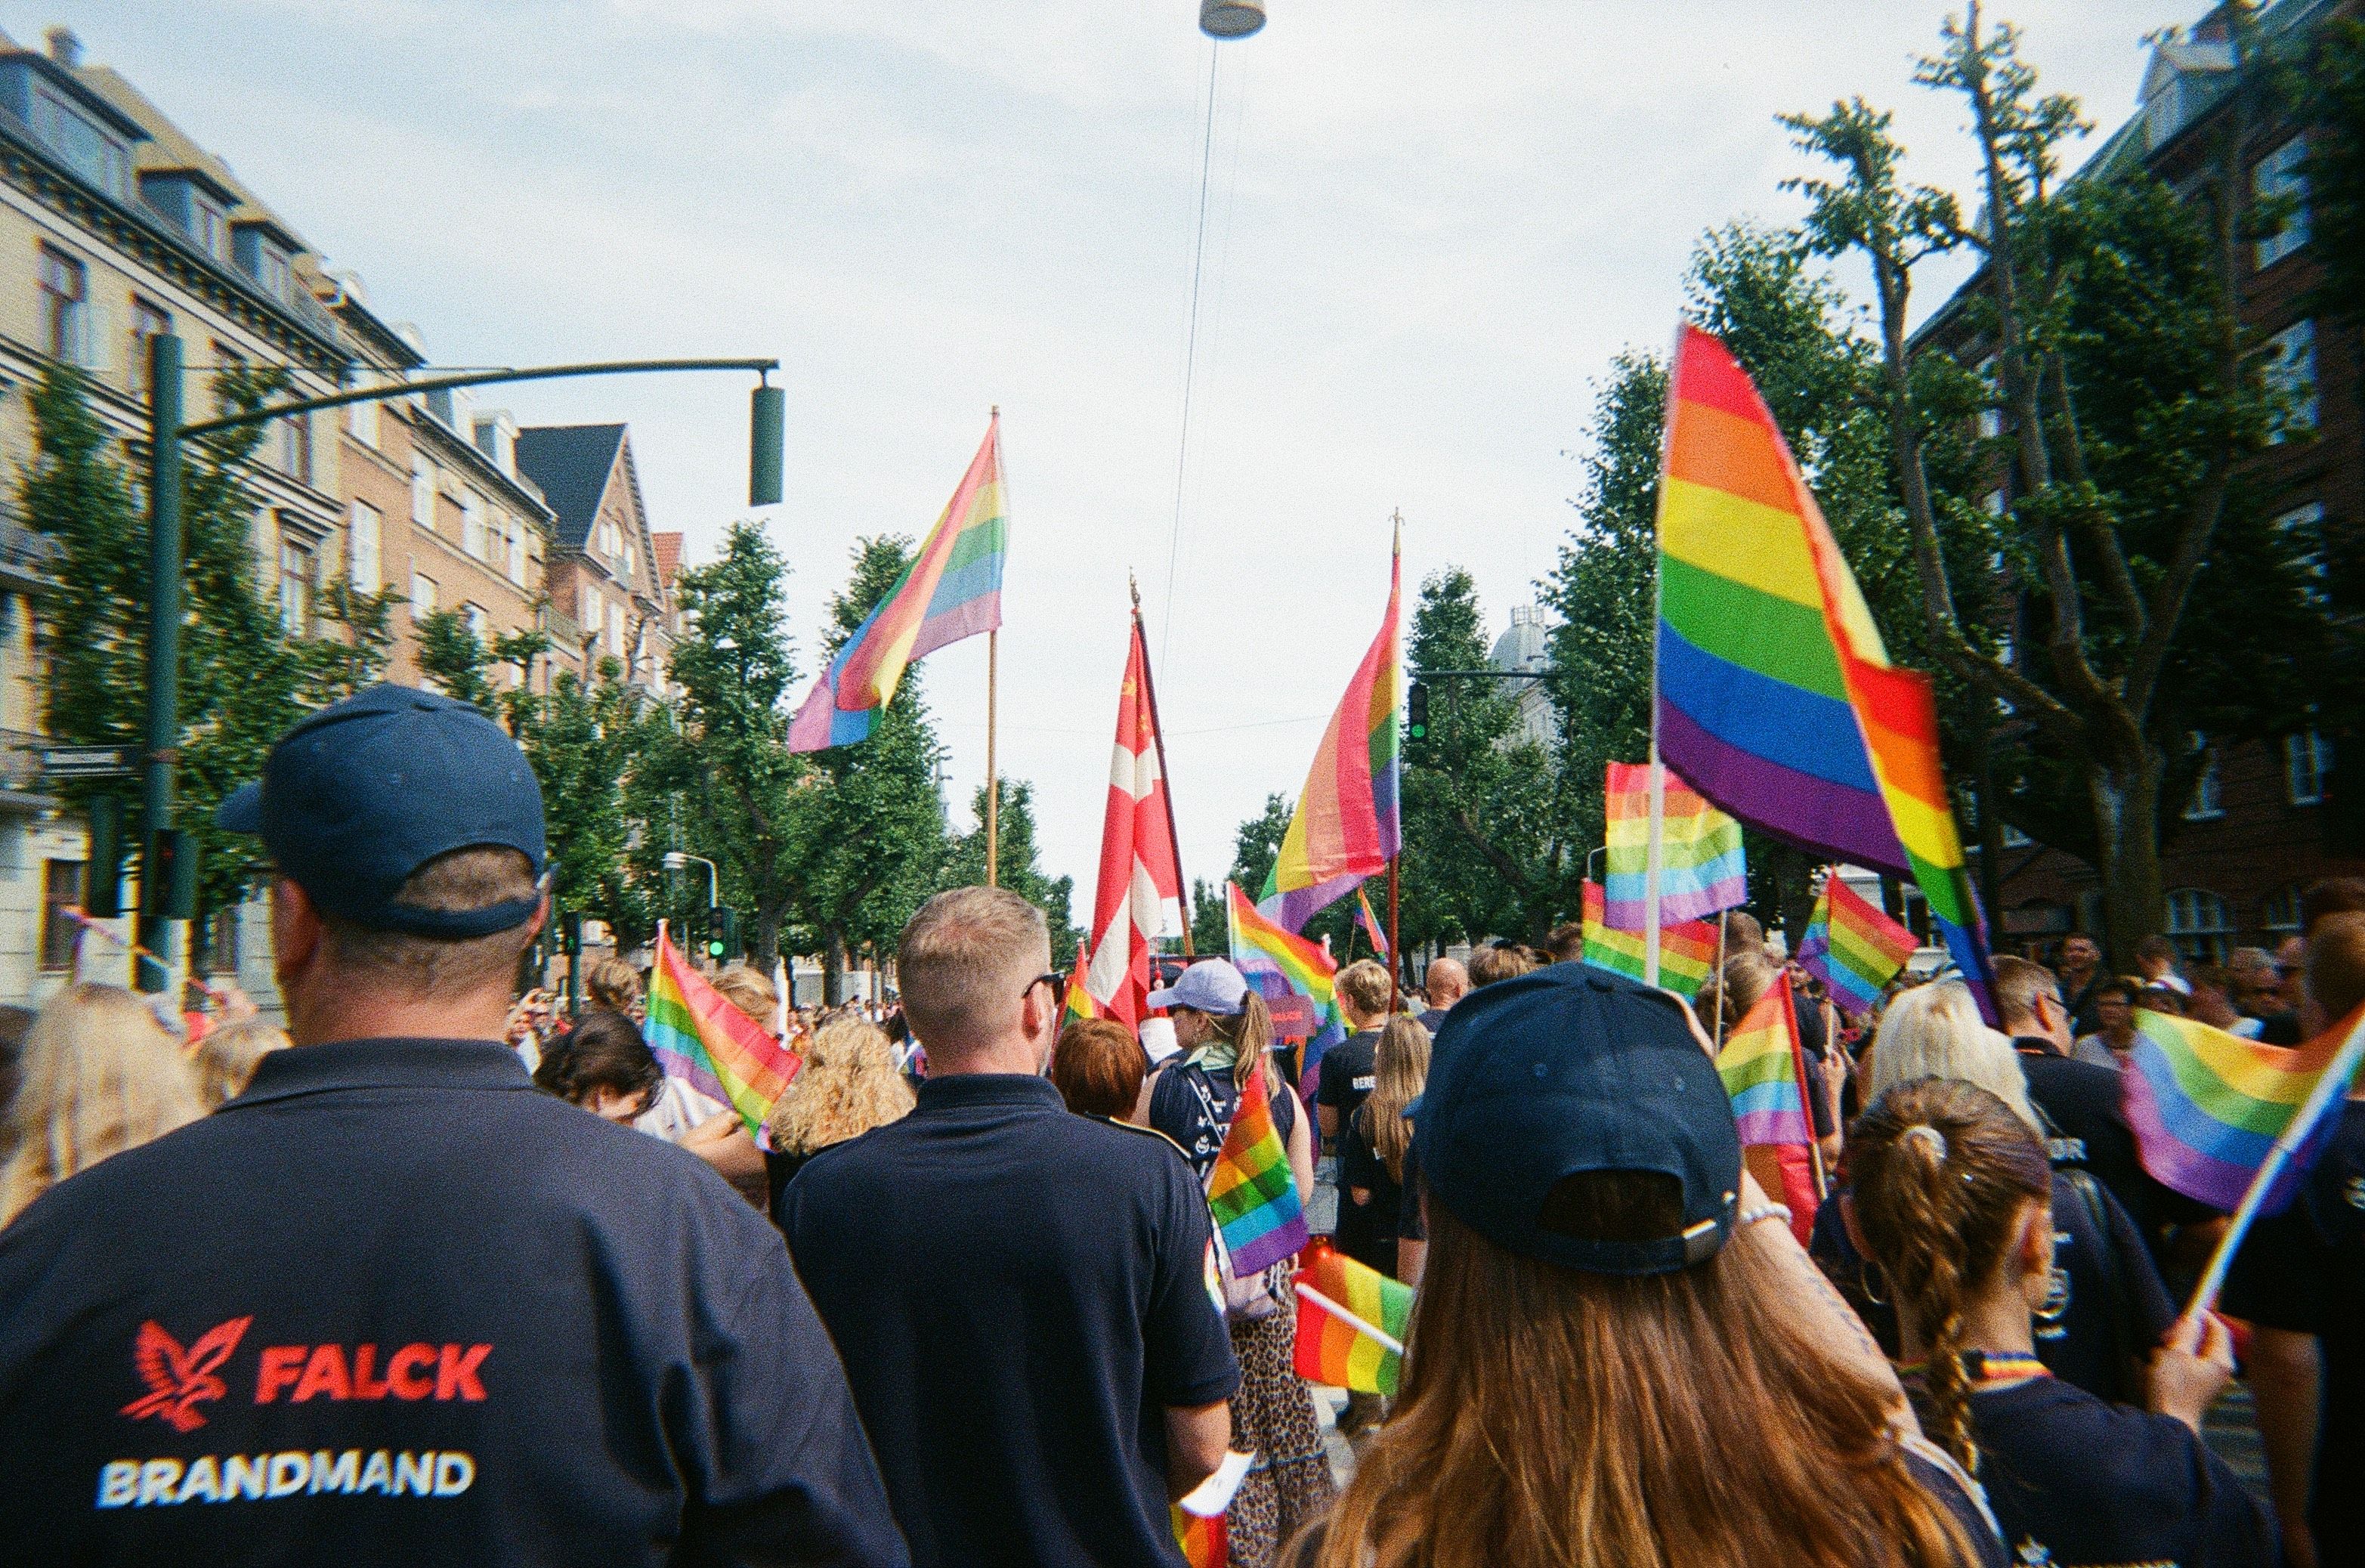 How safe is Denmark really for LGBTQ+ people?